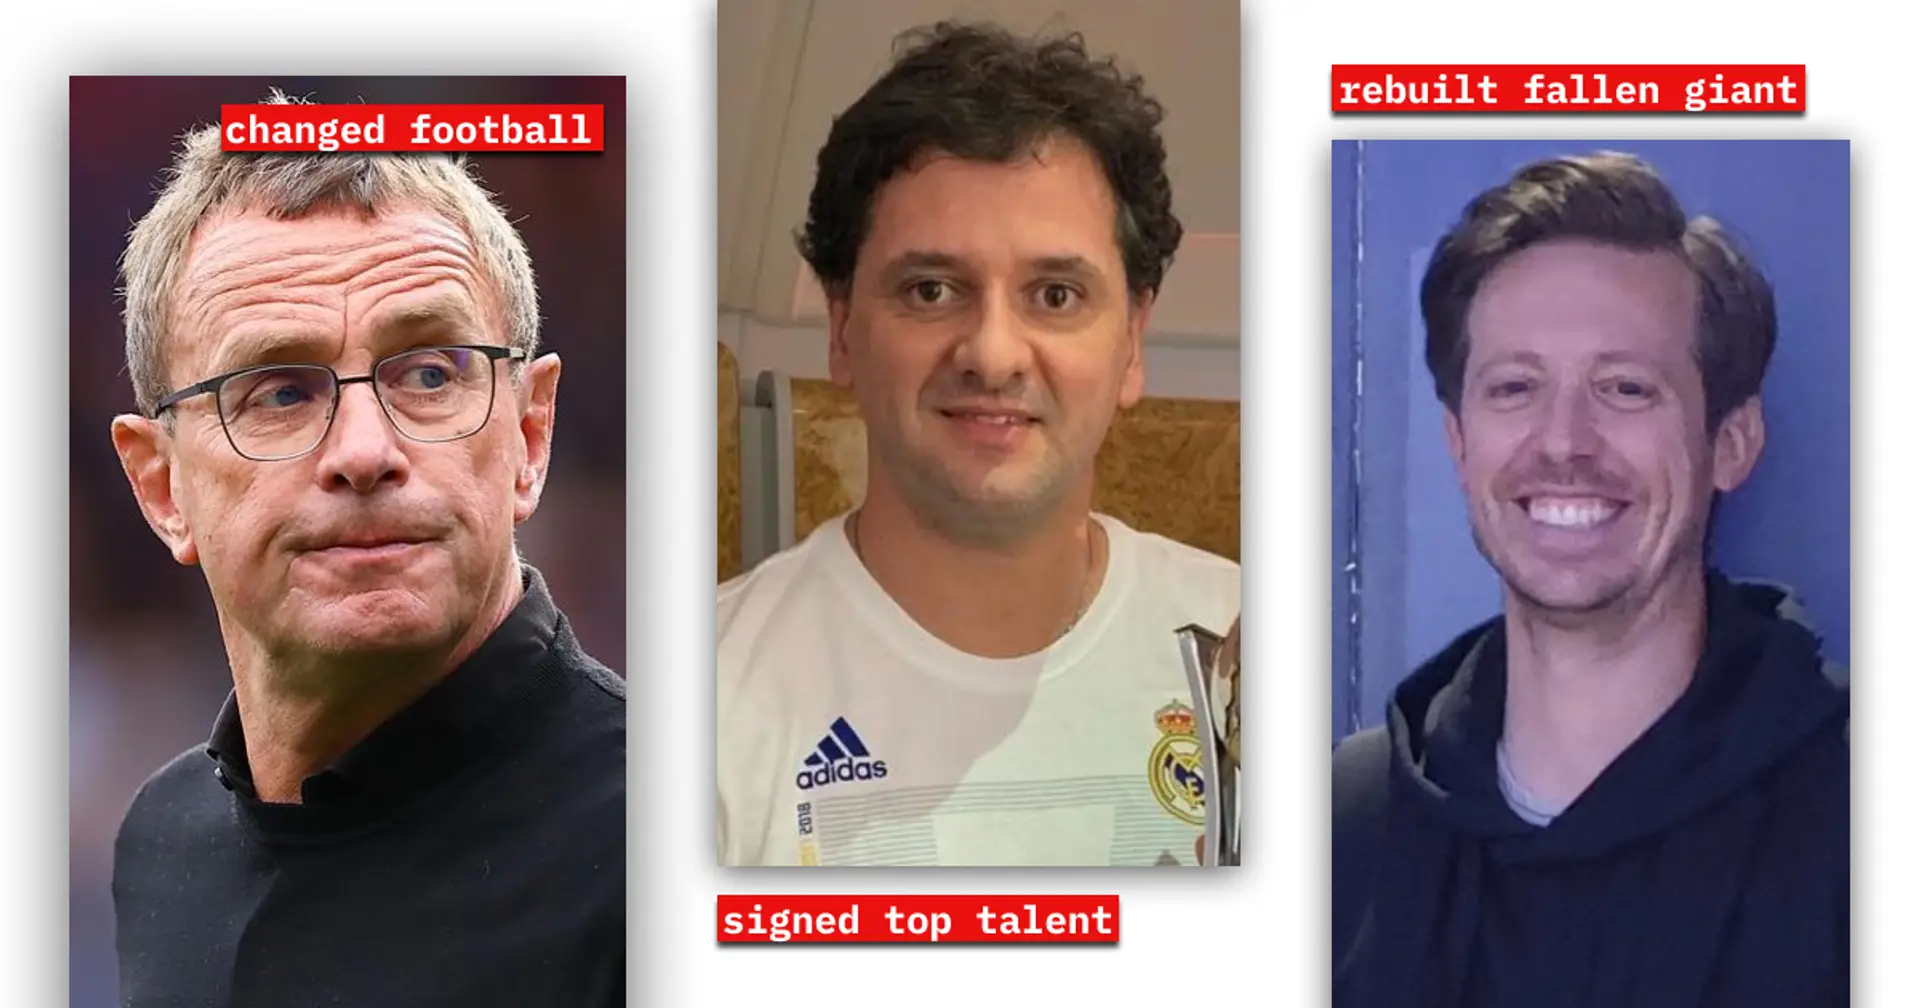 Top 3 scouts/directors of football who would make a perfect HR boss in any big company